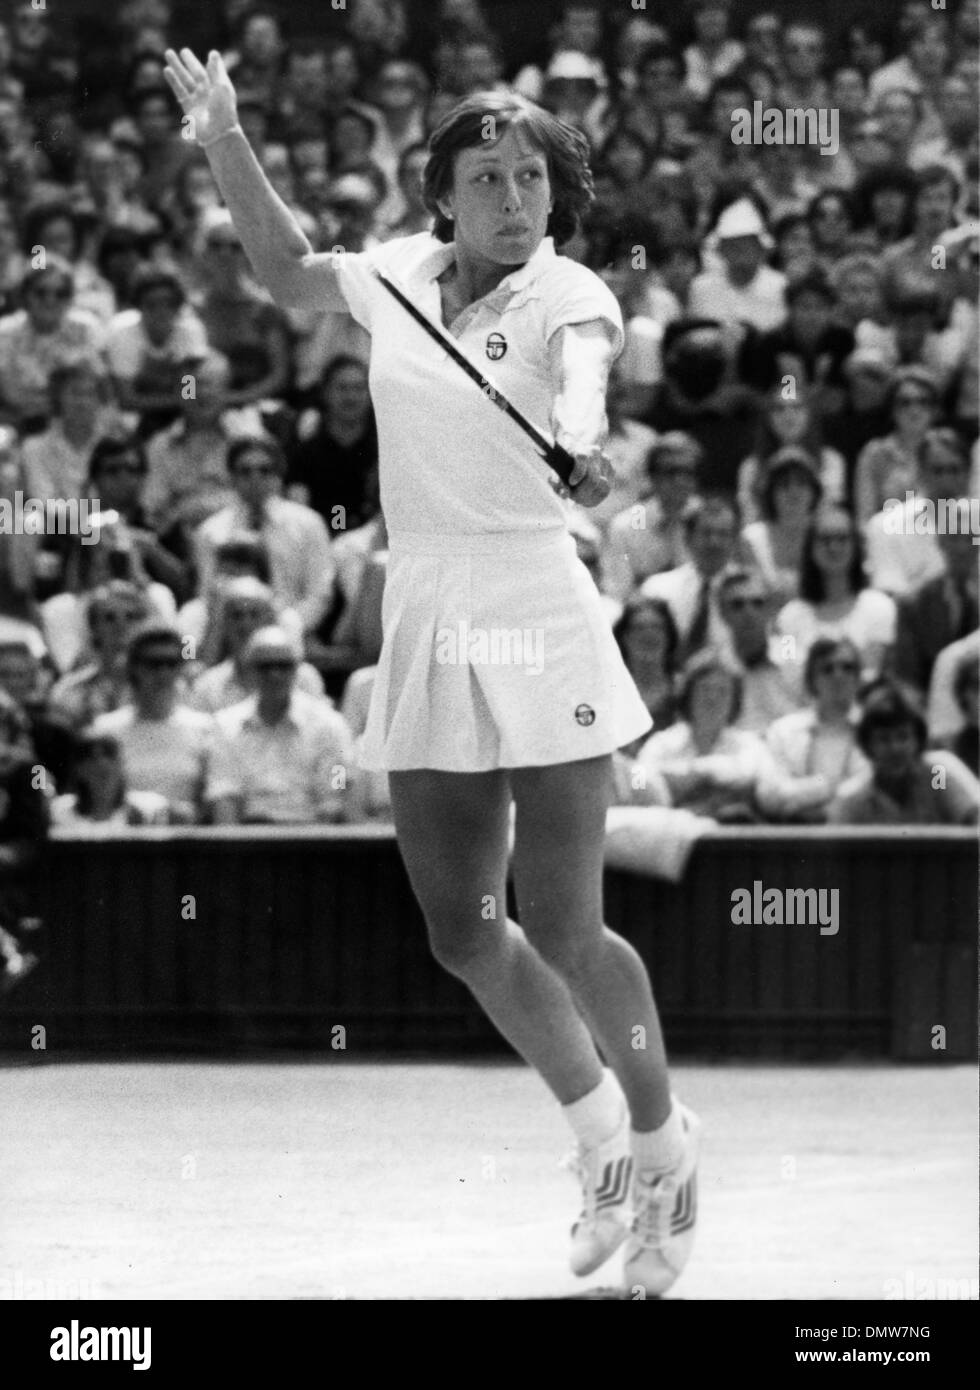 July 3, 1980 - London, England, U.K. - Tennis Star MARTINA NAVRATILOVA during her match against Chris Lloyd which knocked her out of the championships at Wimbledon Championships.  (Credit Image: © KEYSTONE Pictures USA/ZUMAPRESS.com) Stock Photo